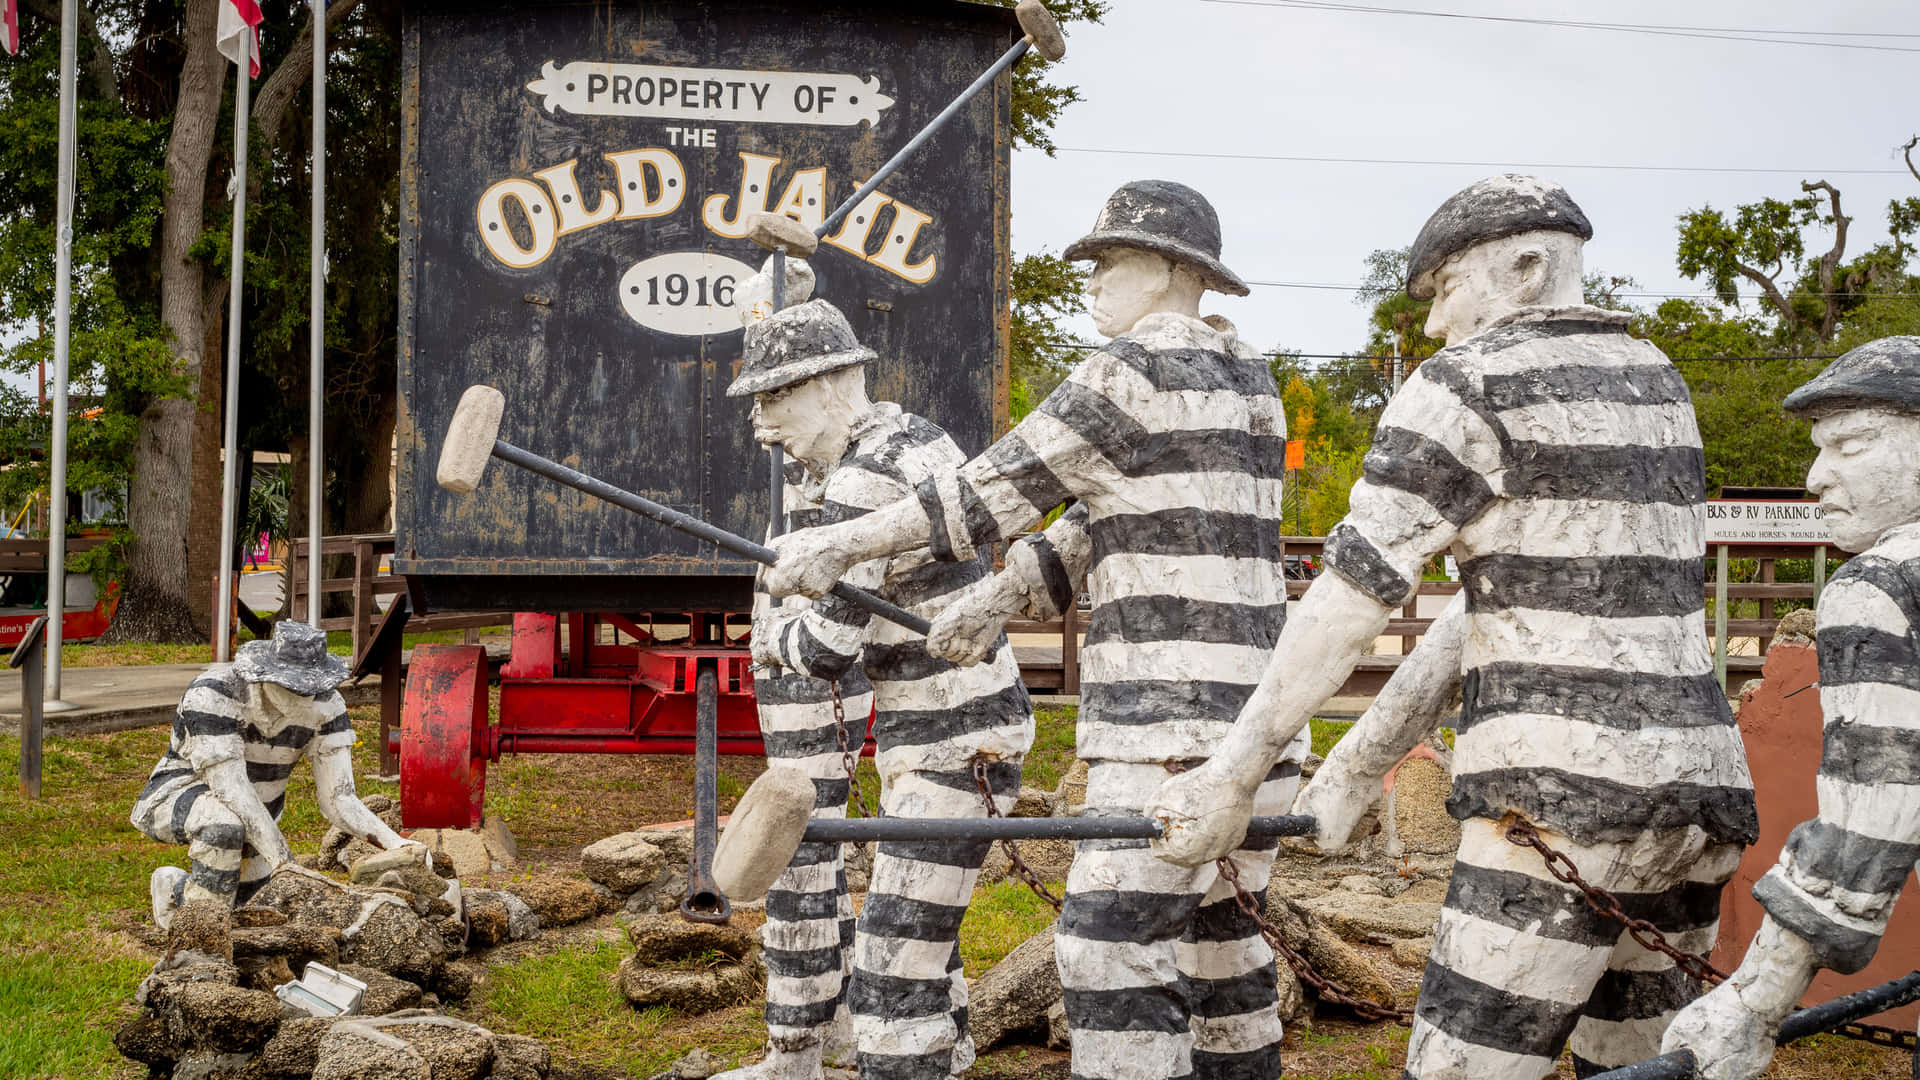 Old Jail Statues In Front Of A Sign